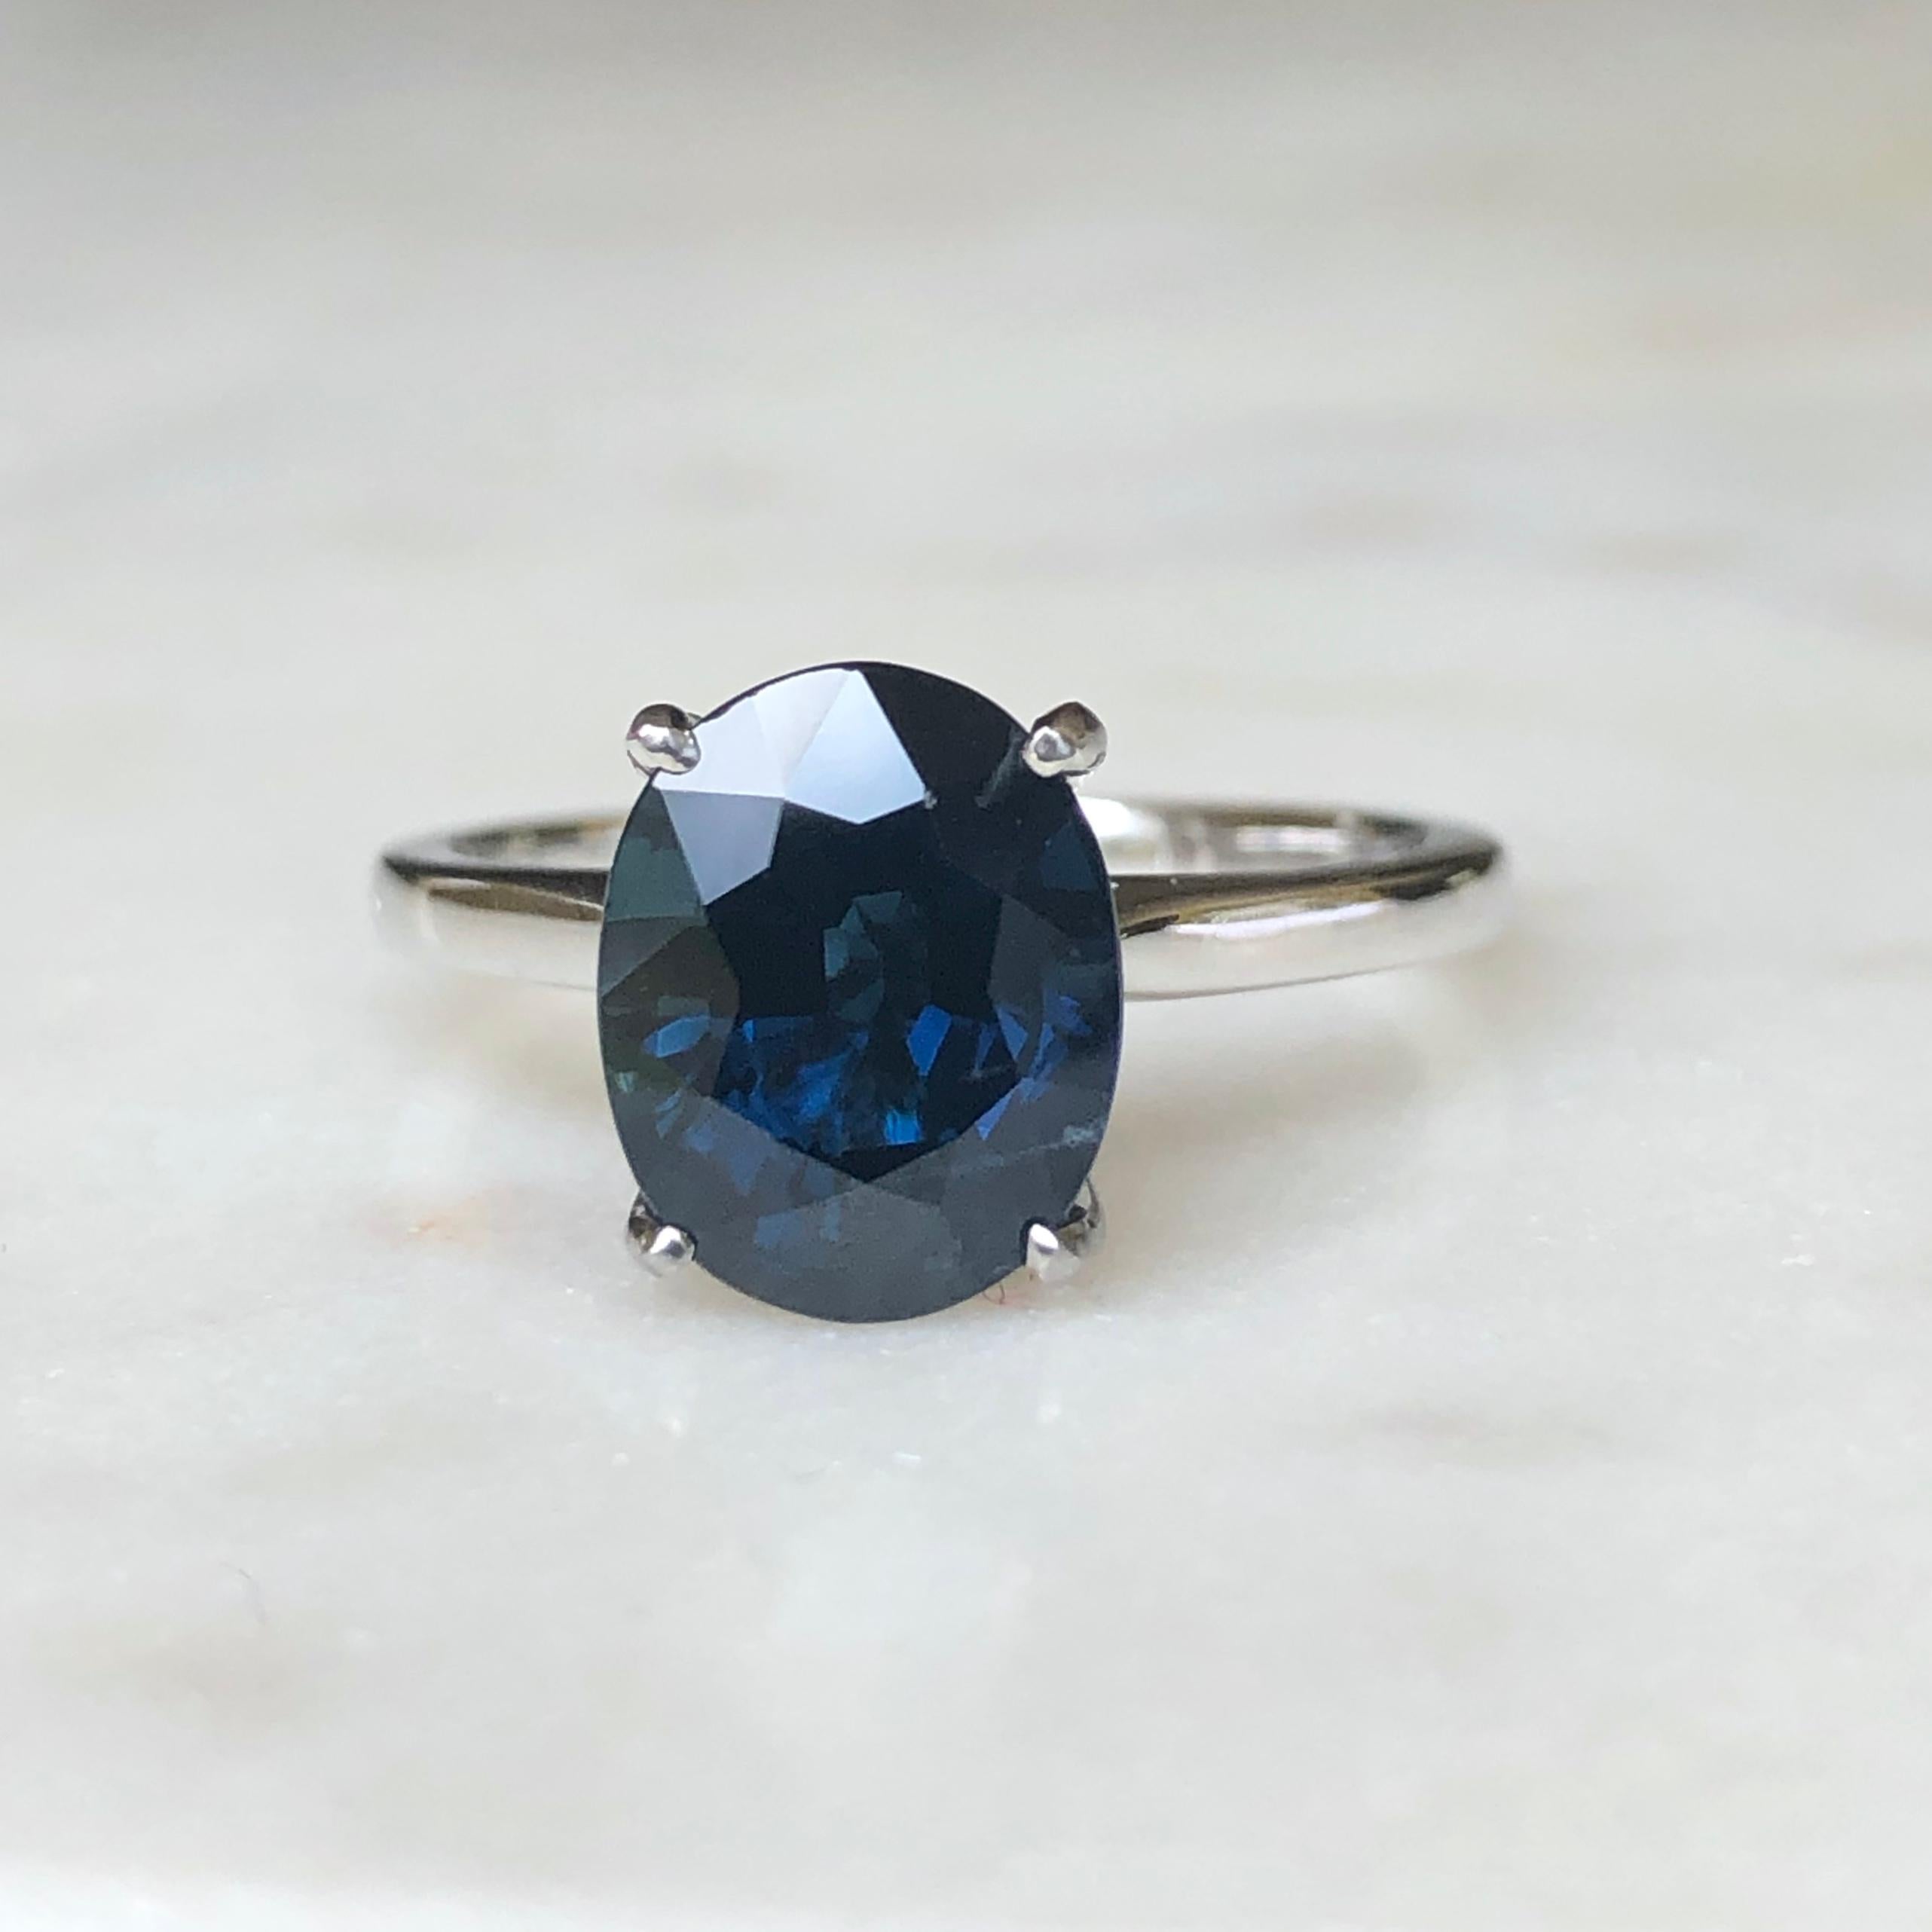 Stunning solitaire natural sapphire engagement ring. Set to centre with a natural oval cut deep blue sapphire with an approximate weight of 3.8 carats in an open back claw platinum setting.
This gorgeous engagement estate ring weight 5.1 Grams.